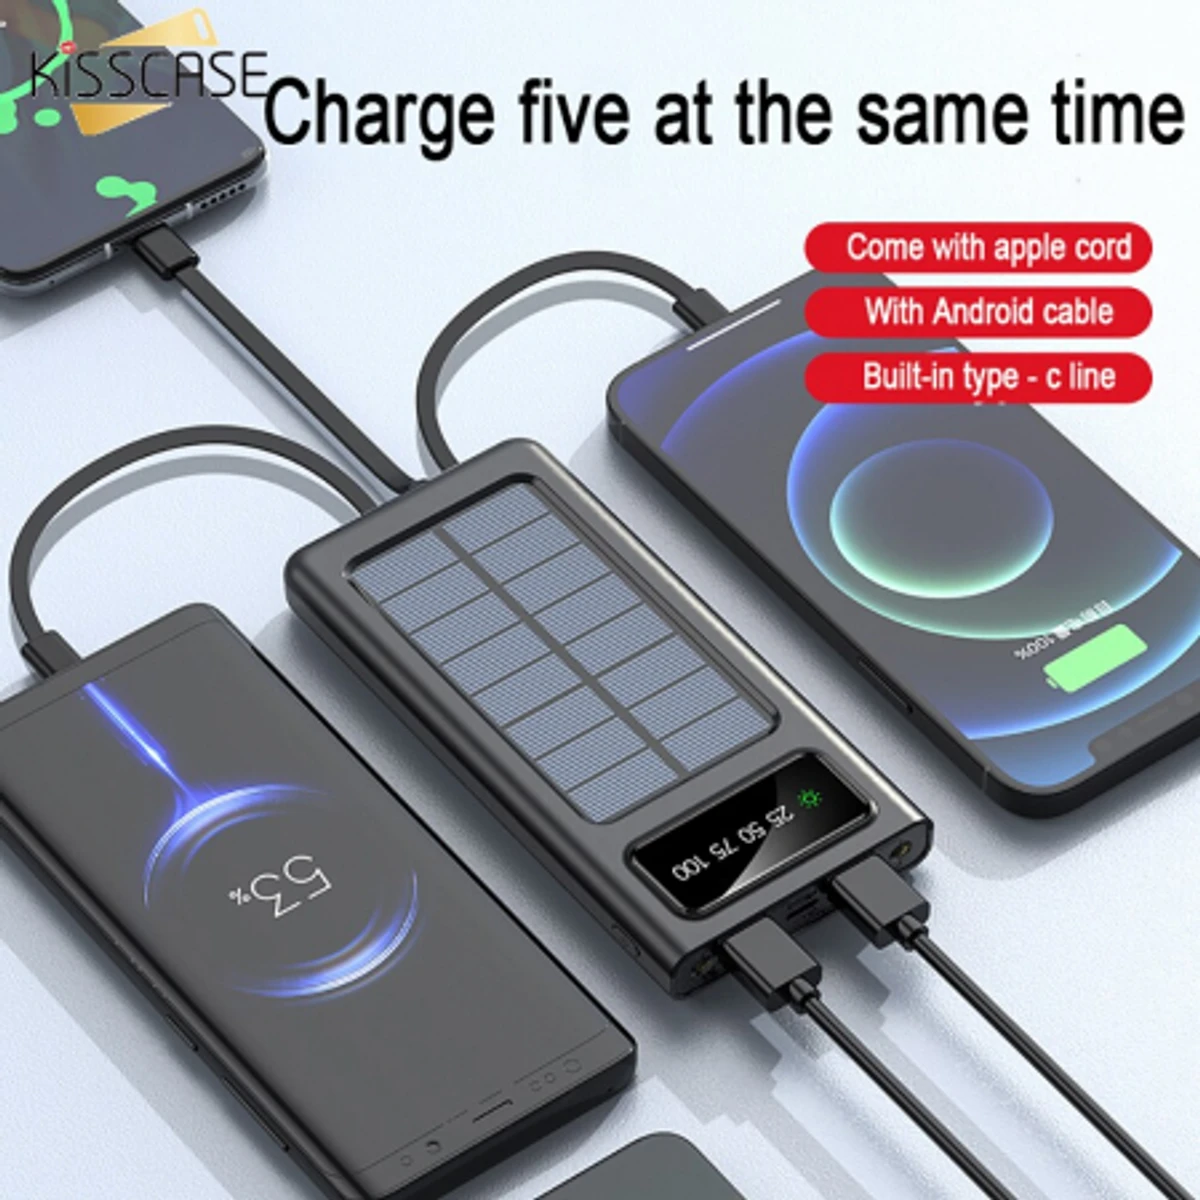 Solar Power Bank 20000mAh External Battery for any Mobile Phone Fast Charger Portable Outdoor Powerbank